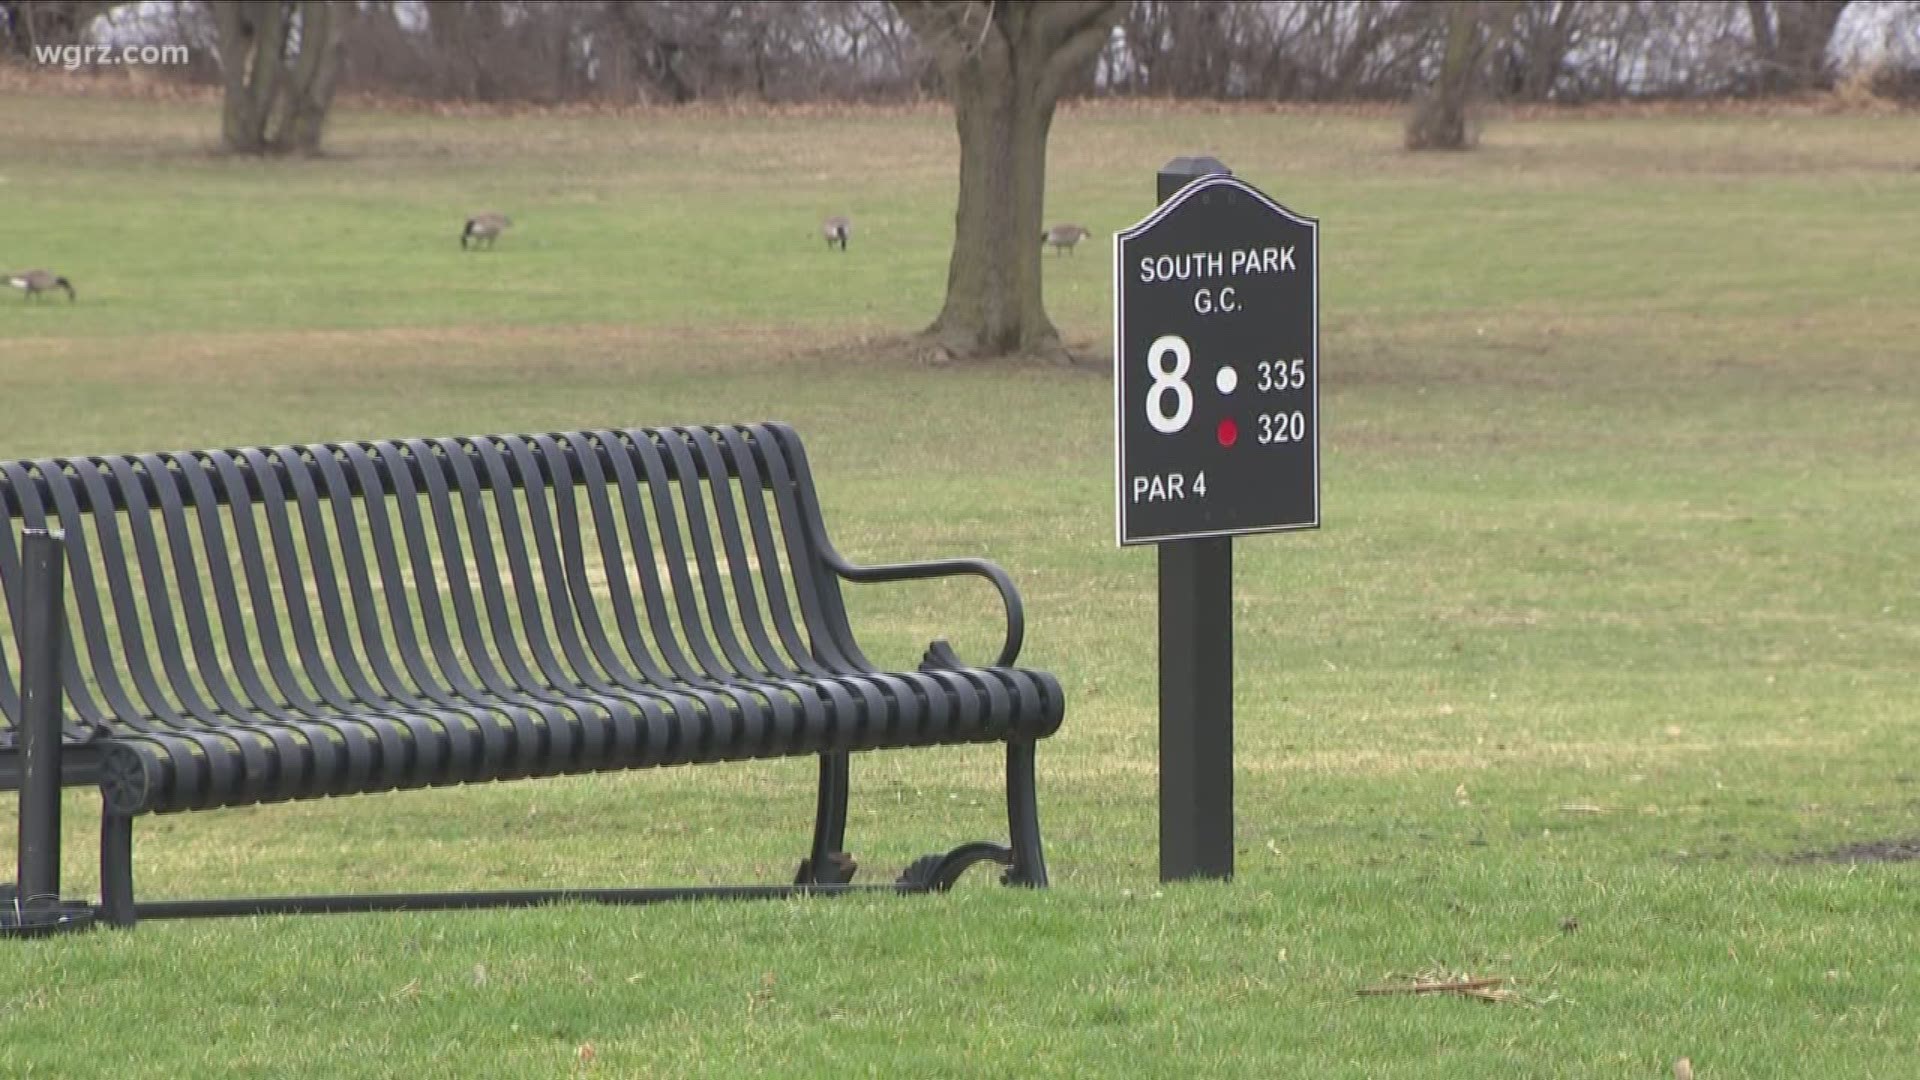 The South Park Golf Club is pushing back against a proposed new course in South Buffalo.